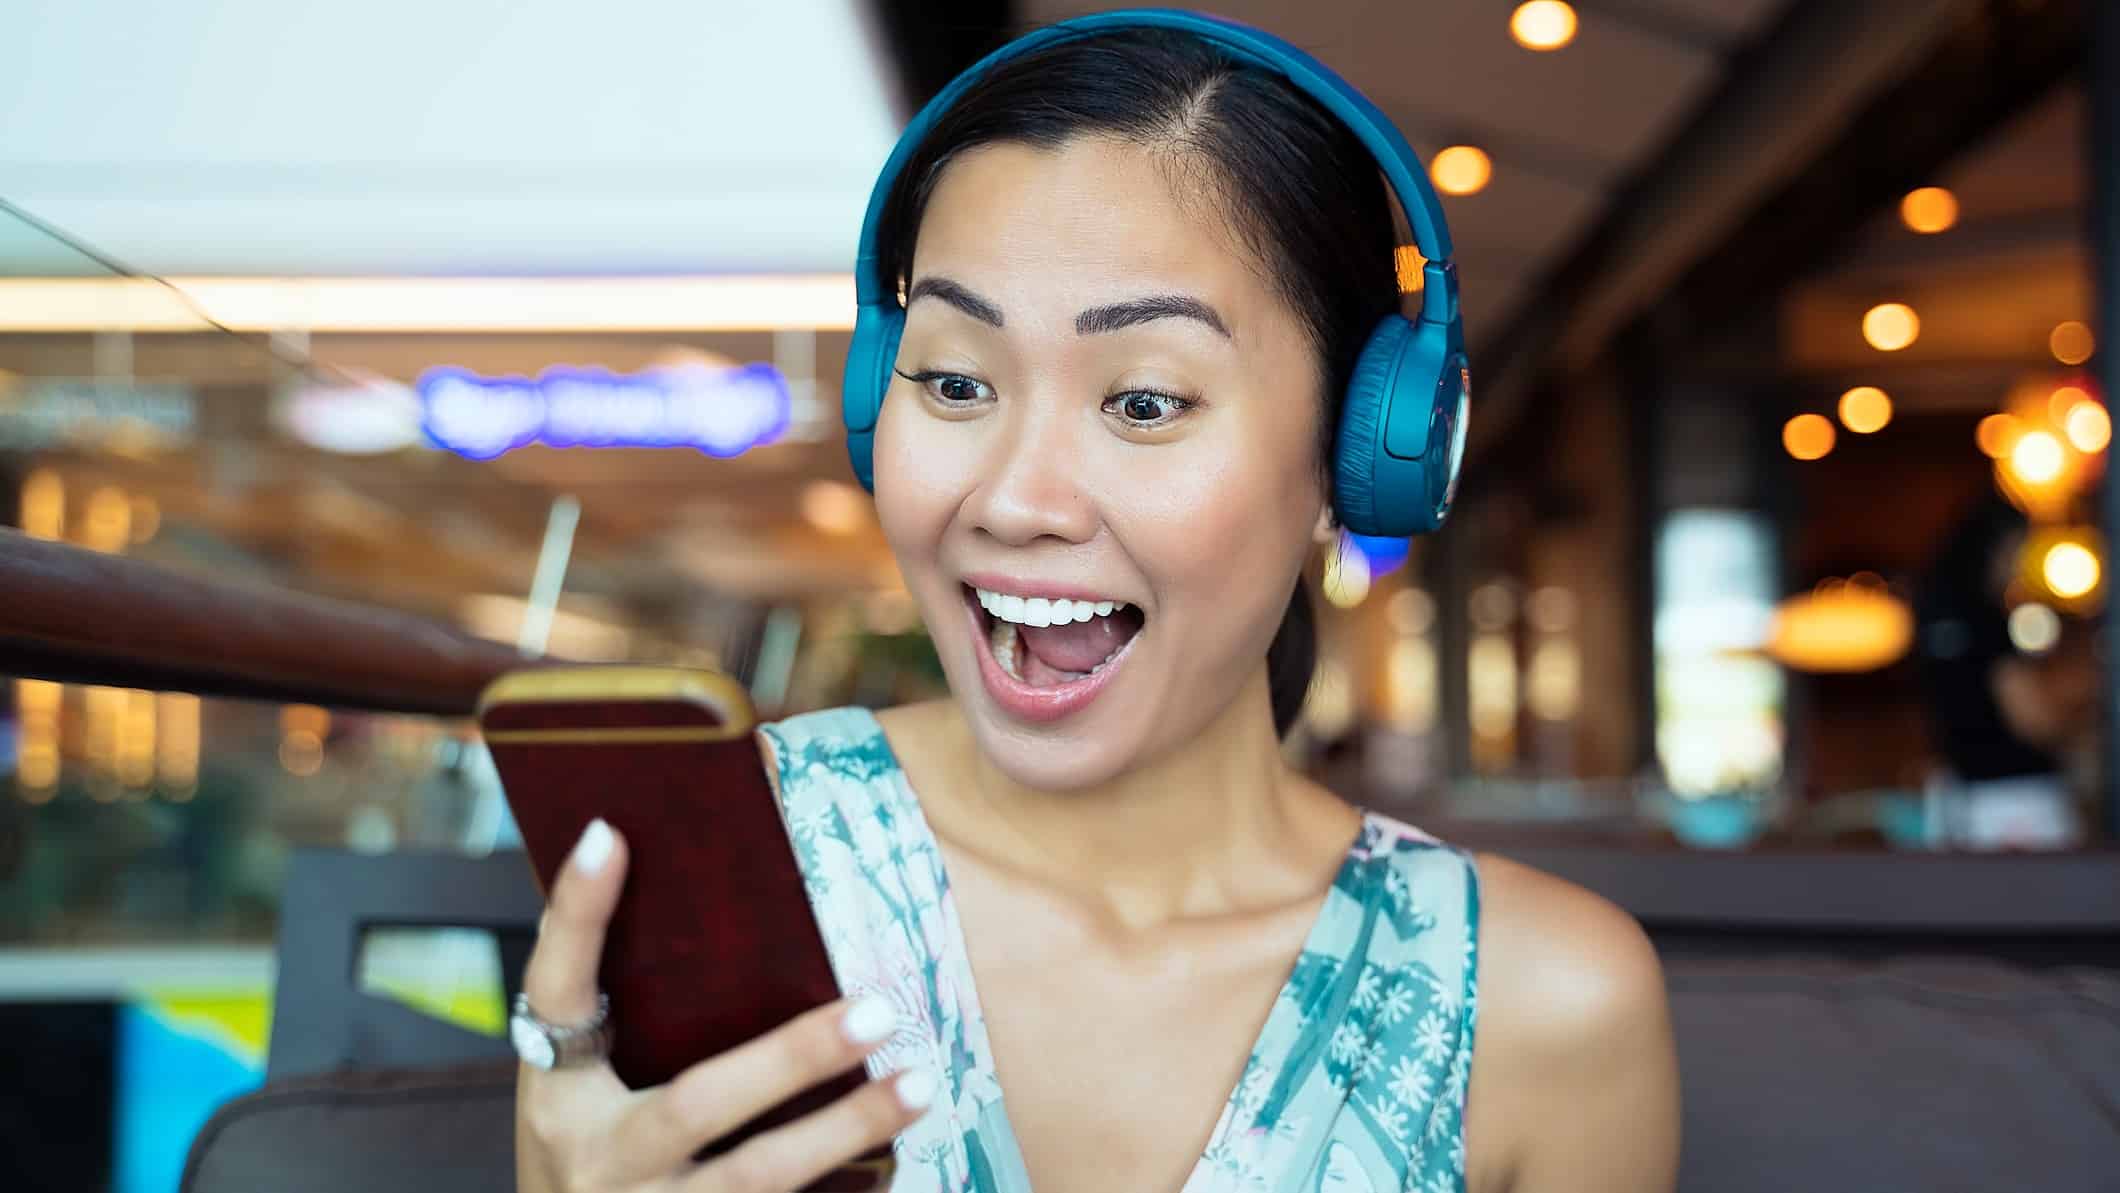 A woman wearing headphones looks delighted and animated on news she's receiving from her mobile phone that she is holding close to her face.